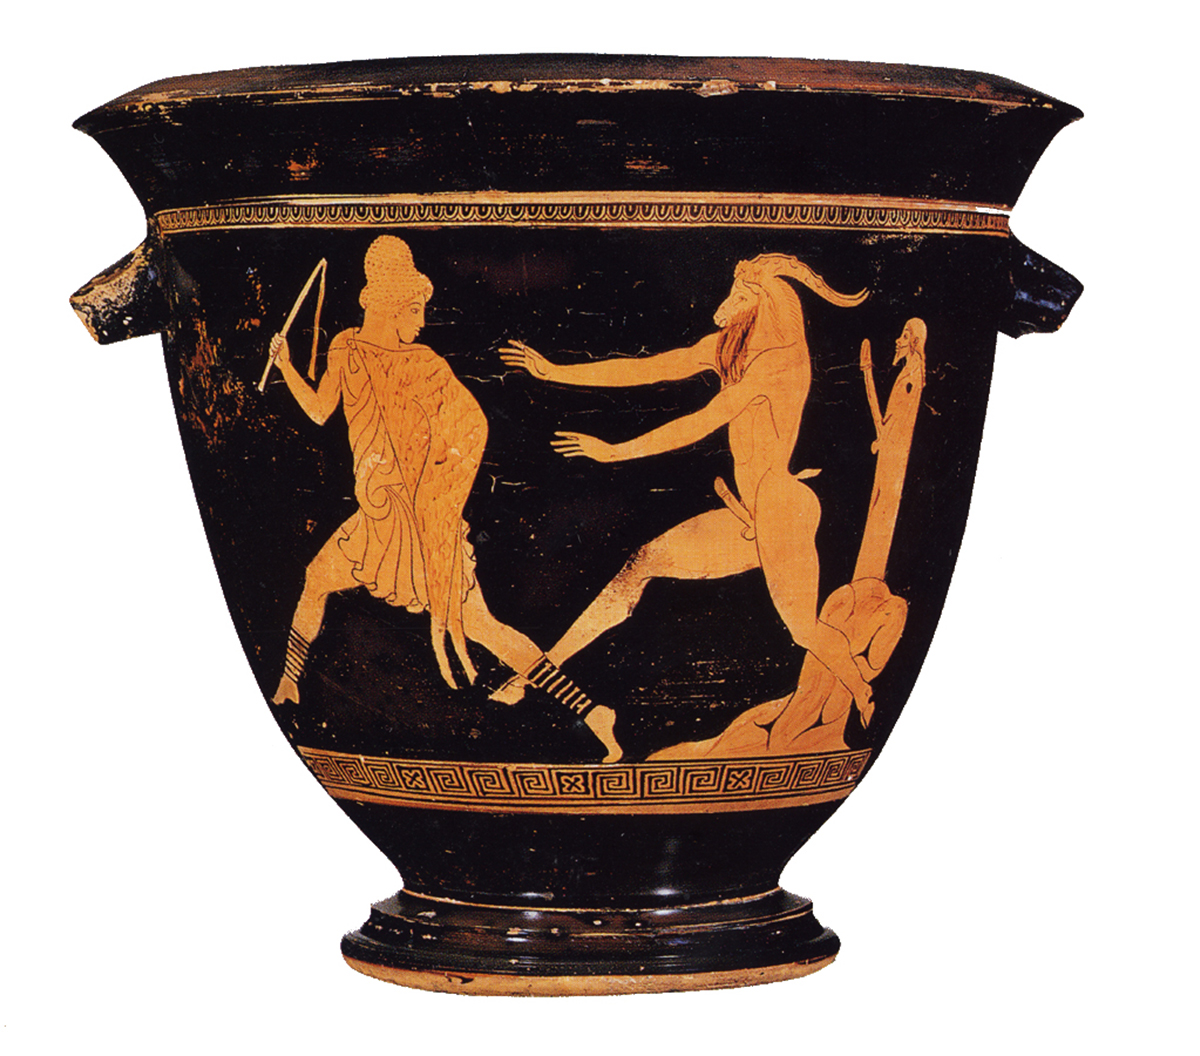 A depiction of Pan on a fifth-century Greek red-figure vase. Courtesy of the Museum of Fine Arts, Boston.